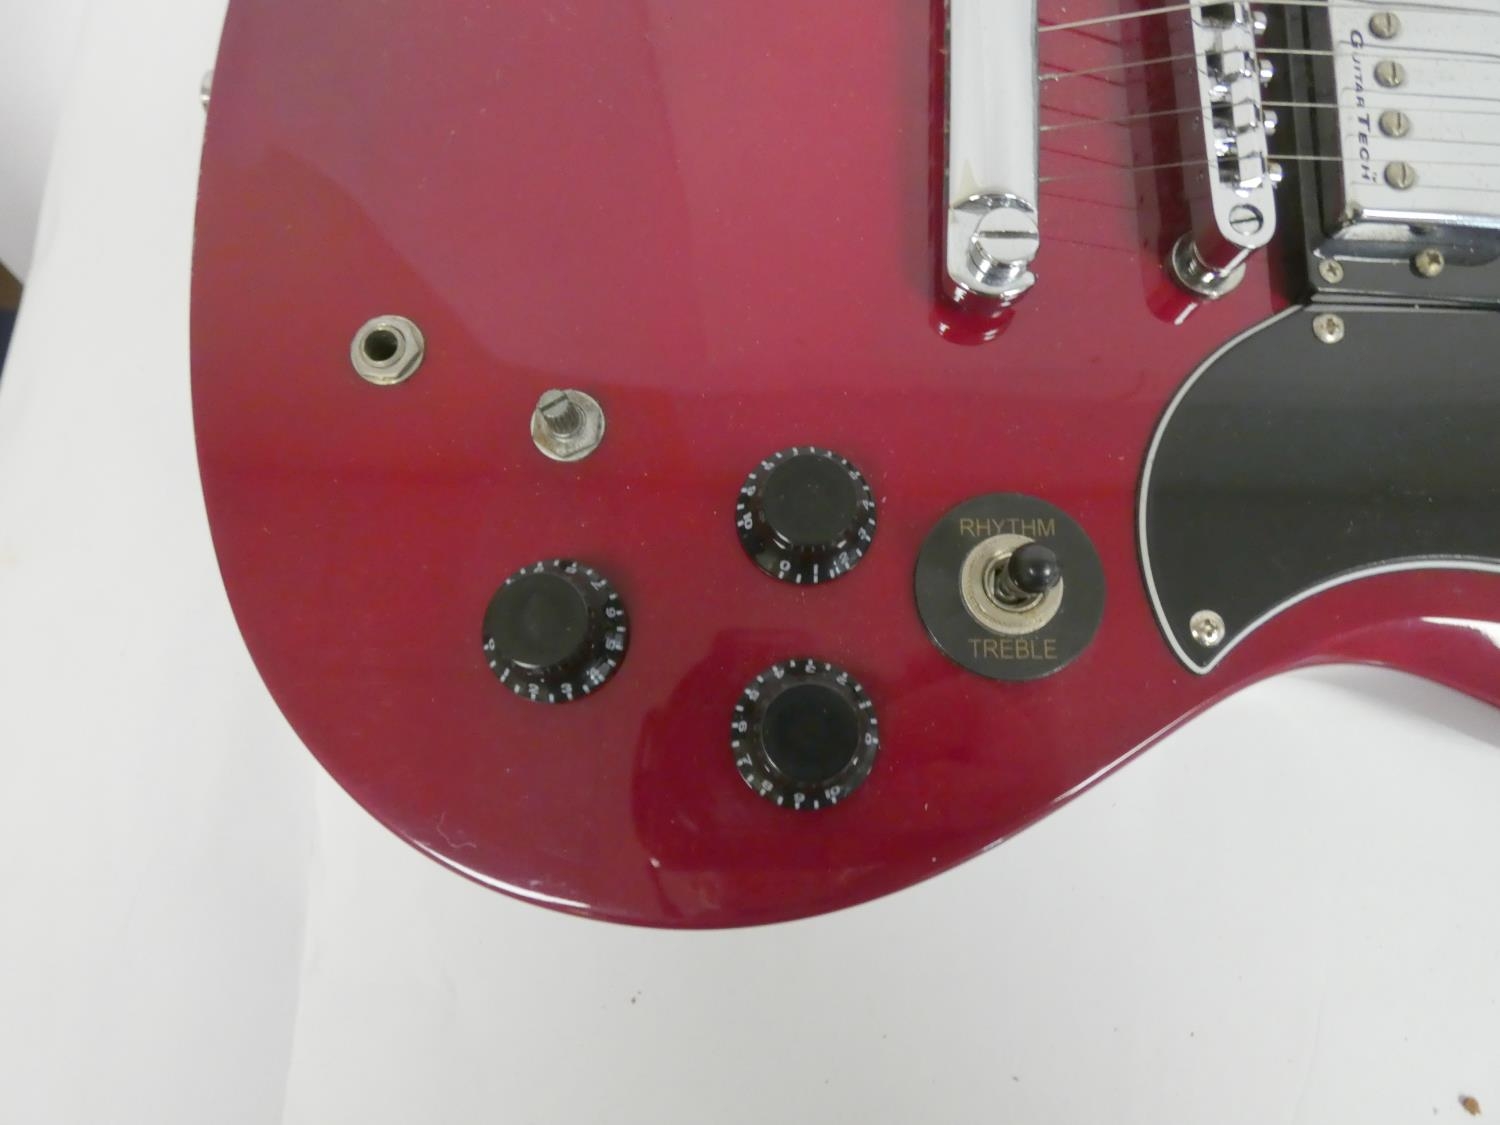 Encore six string electric guitar in maroon colour, 100cm in length. - Image 7 of 7